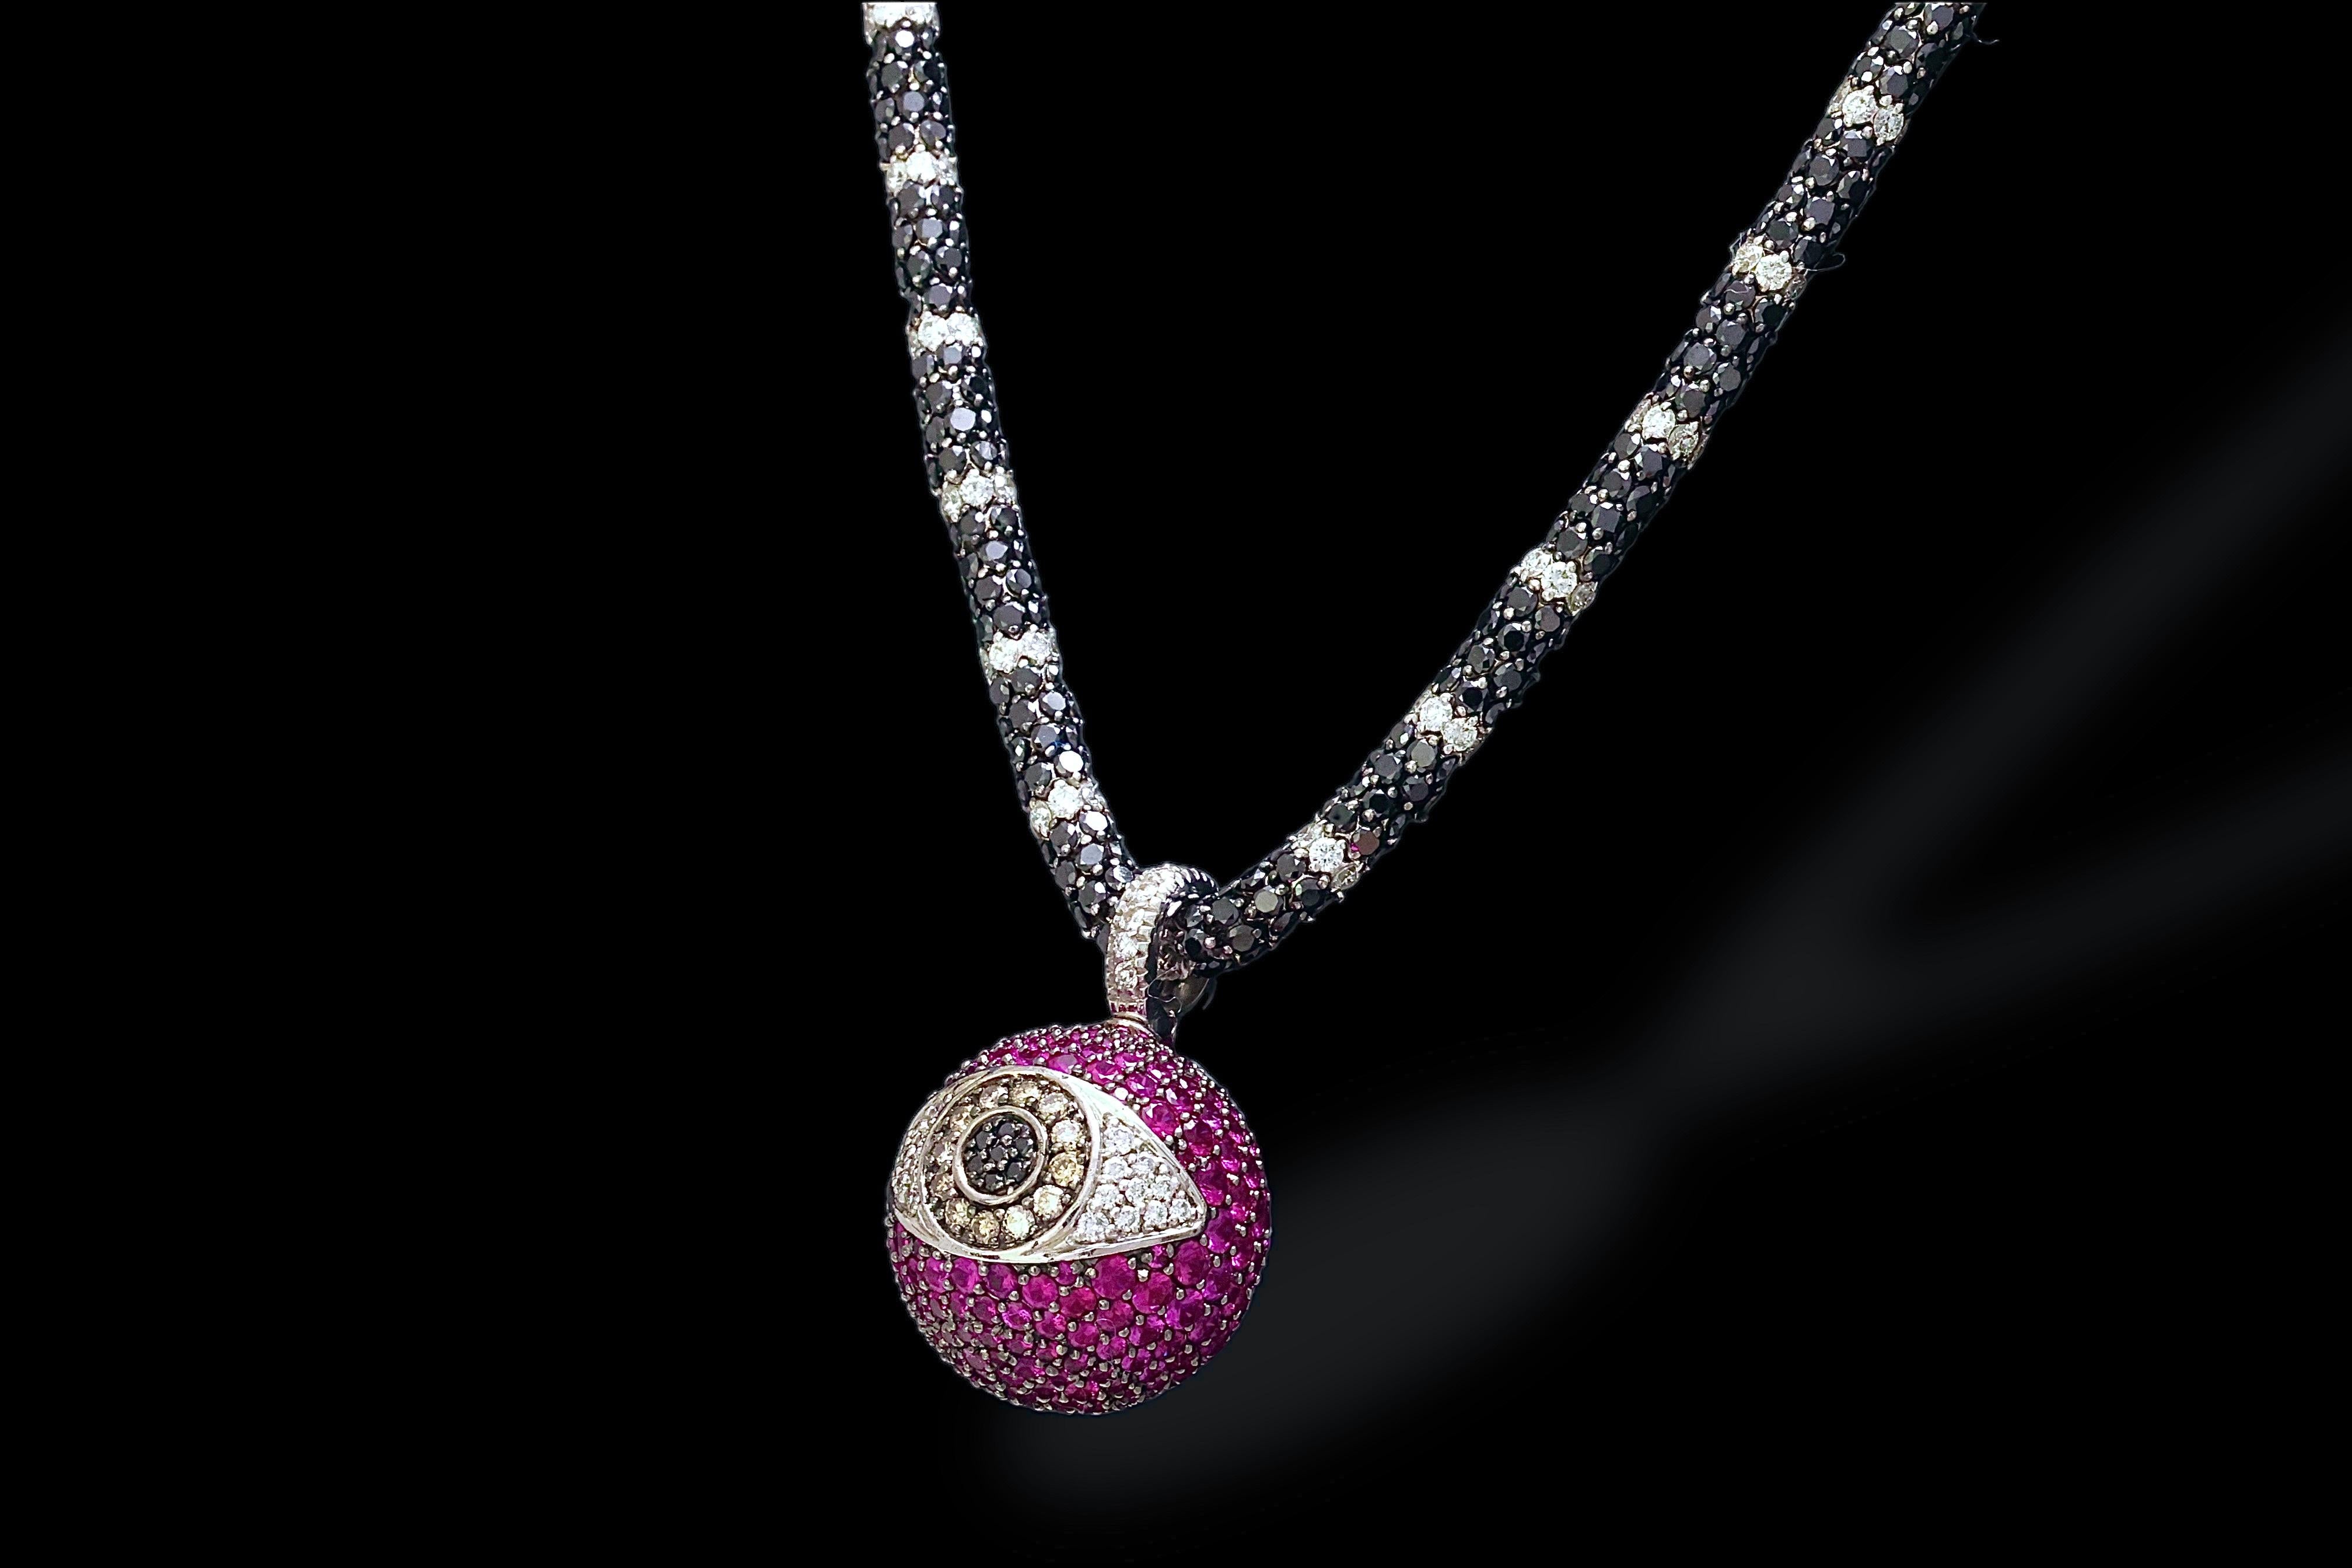 18 Kt Gold Necklace & Pendant With 30 ct. Black & White Diamonds & Rubies For Sale 3